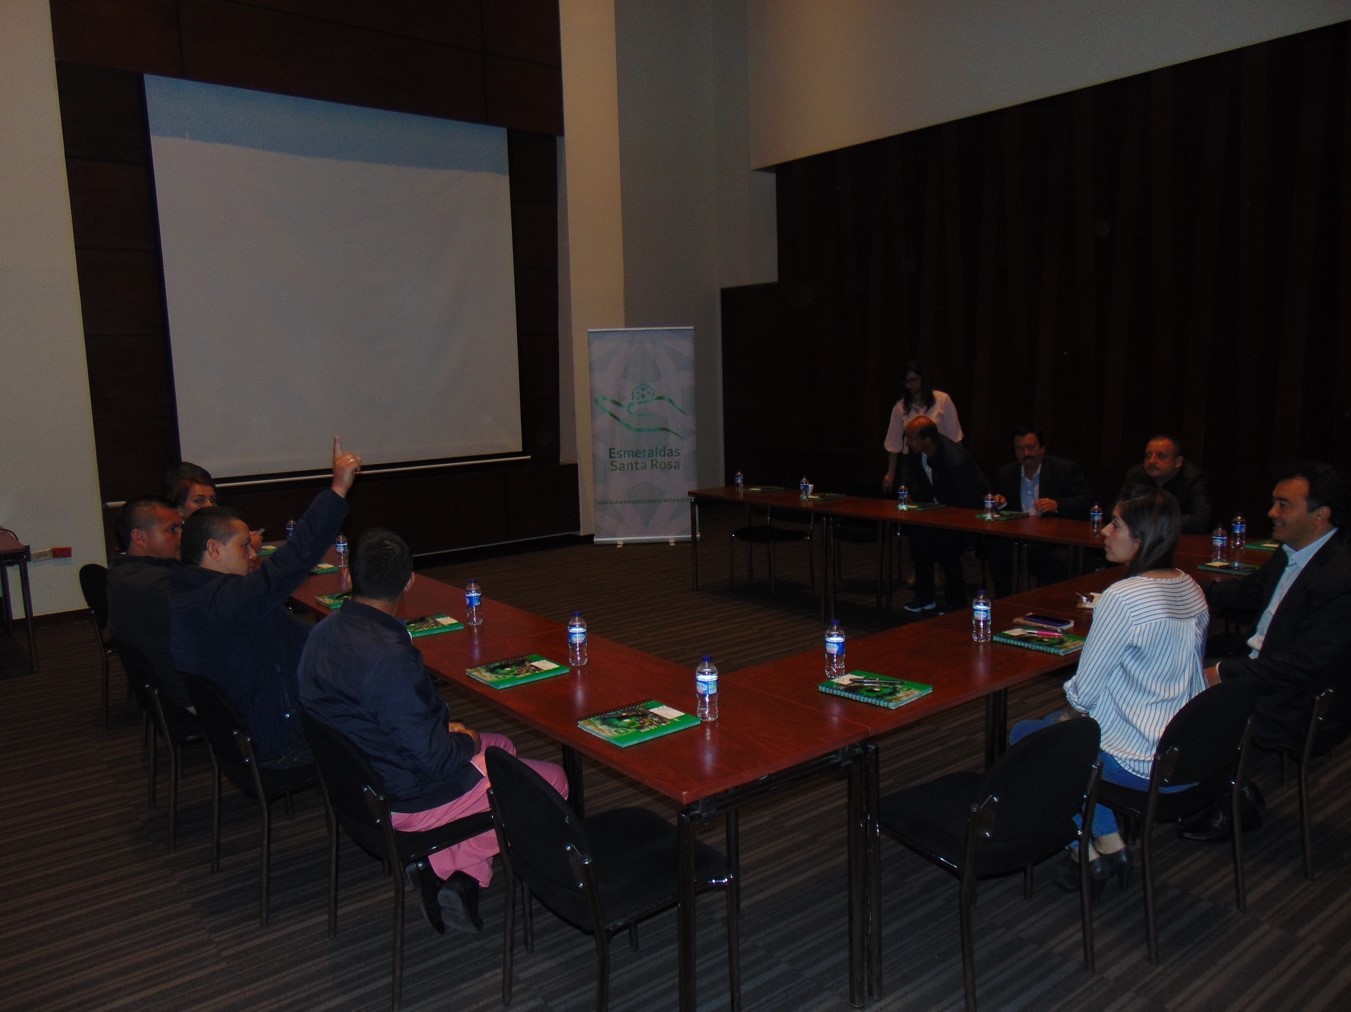 About the Environment Confidence Meeting Between Legal Representatives and Mining Dealers